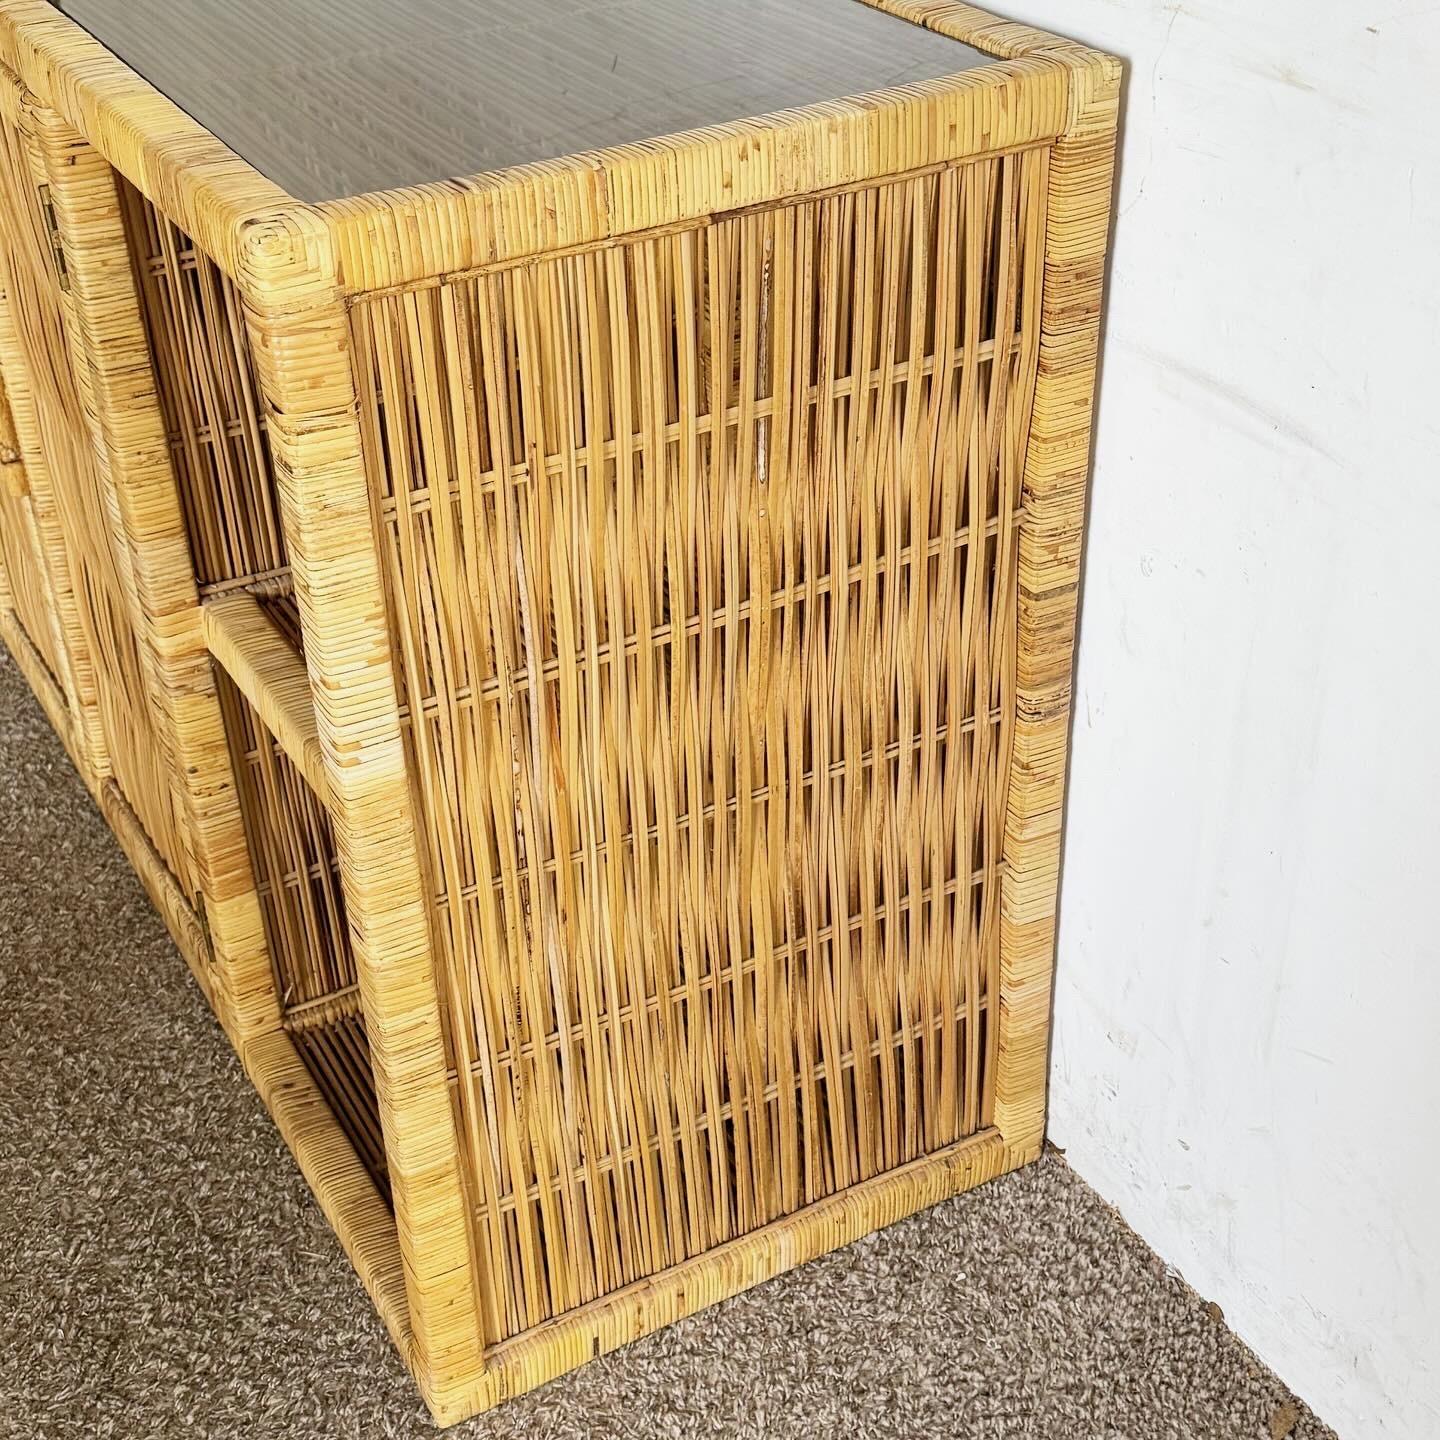 Elevate your home decor with the Boho Chic Woven Rattan Smoked Glass Top Credenza. This stylish piece combines the warmth and texture of woven rattan with the sleek, modern appeal of a smoked glass top. Perfect for adding a touch of bohemian